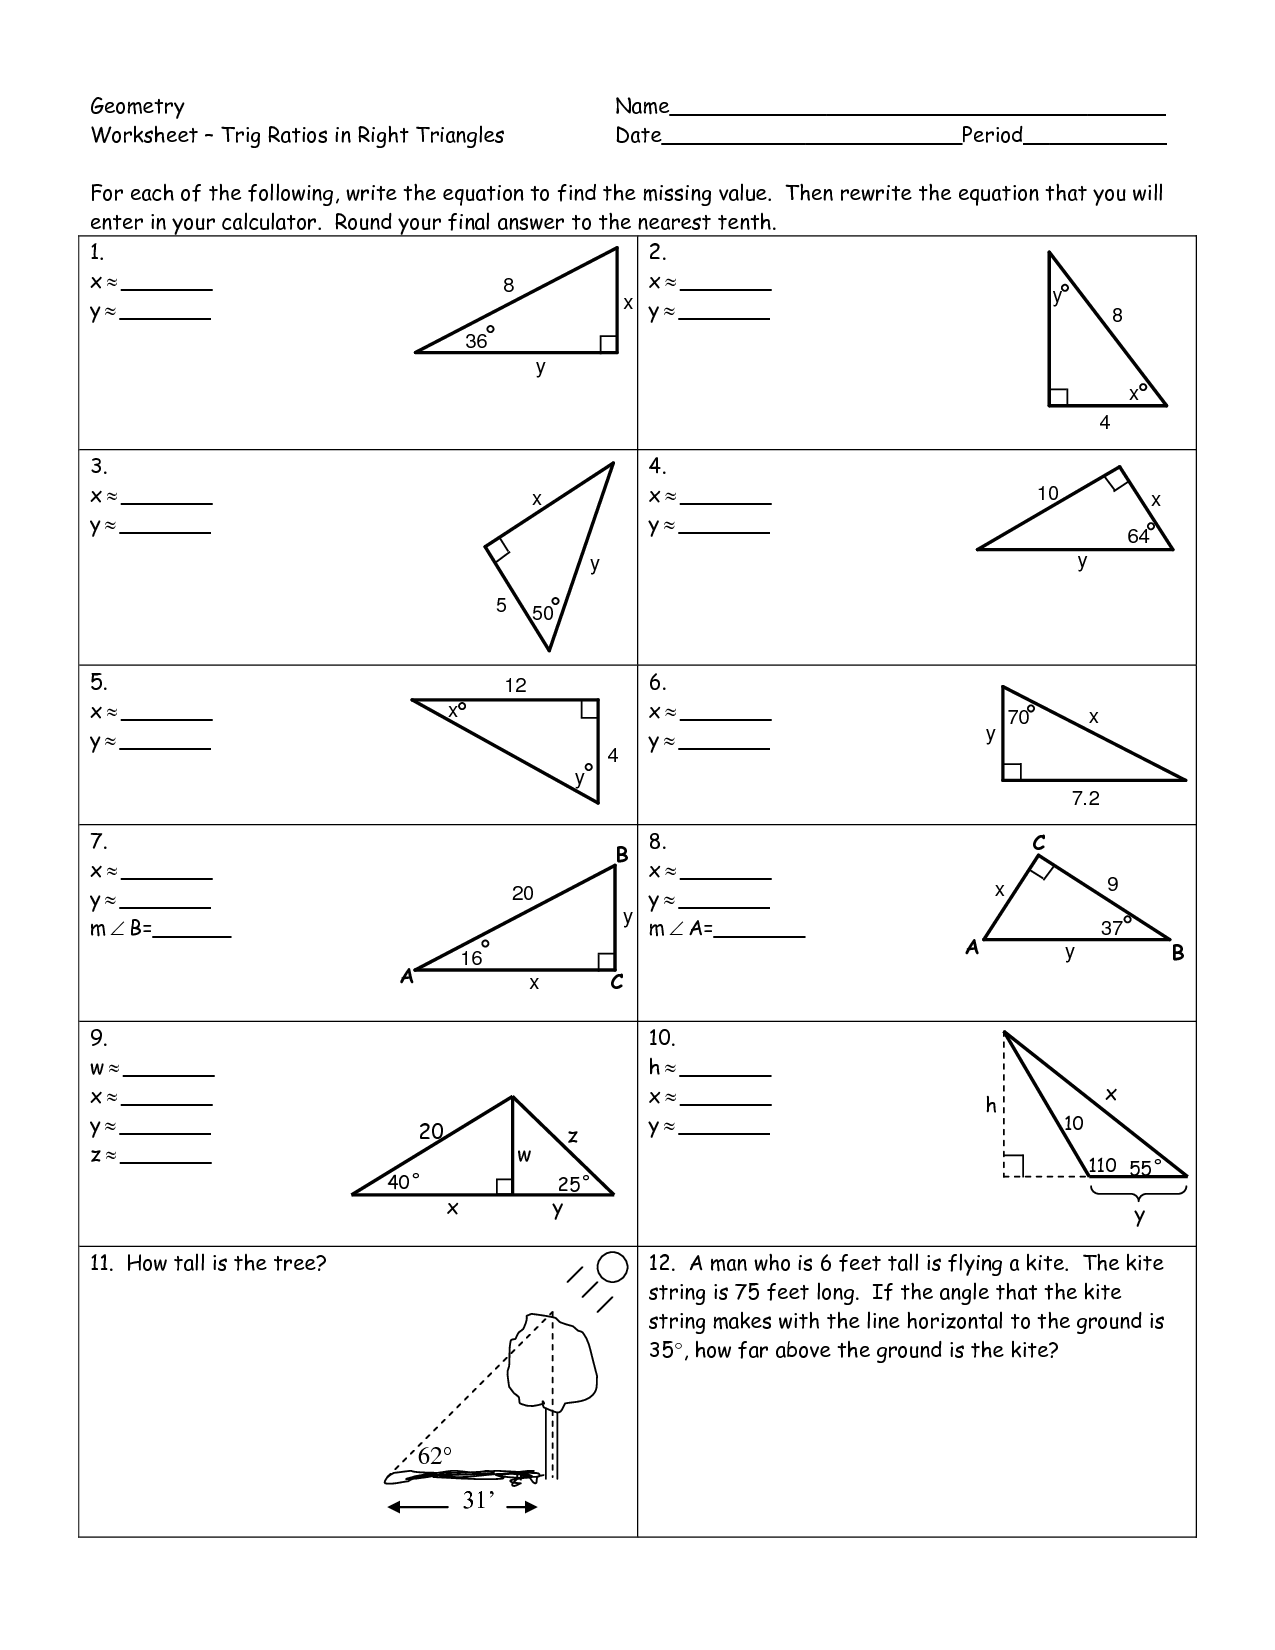 Geometry Worksheet - Trig Ratios in Right Triangles